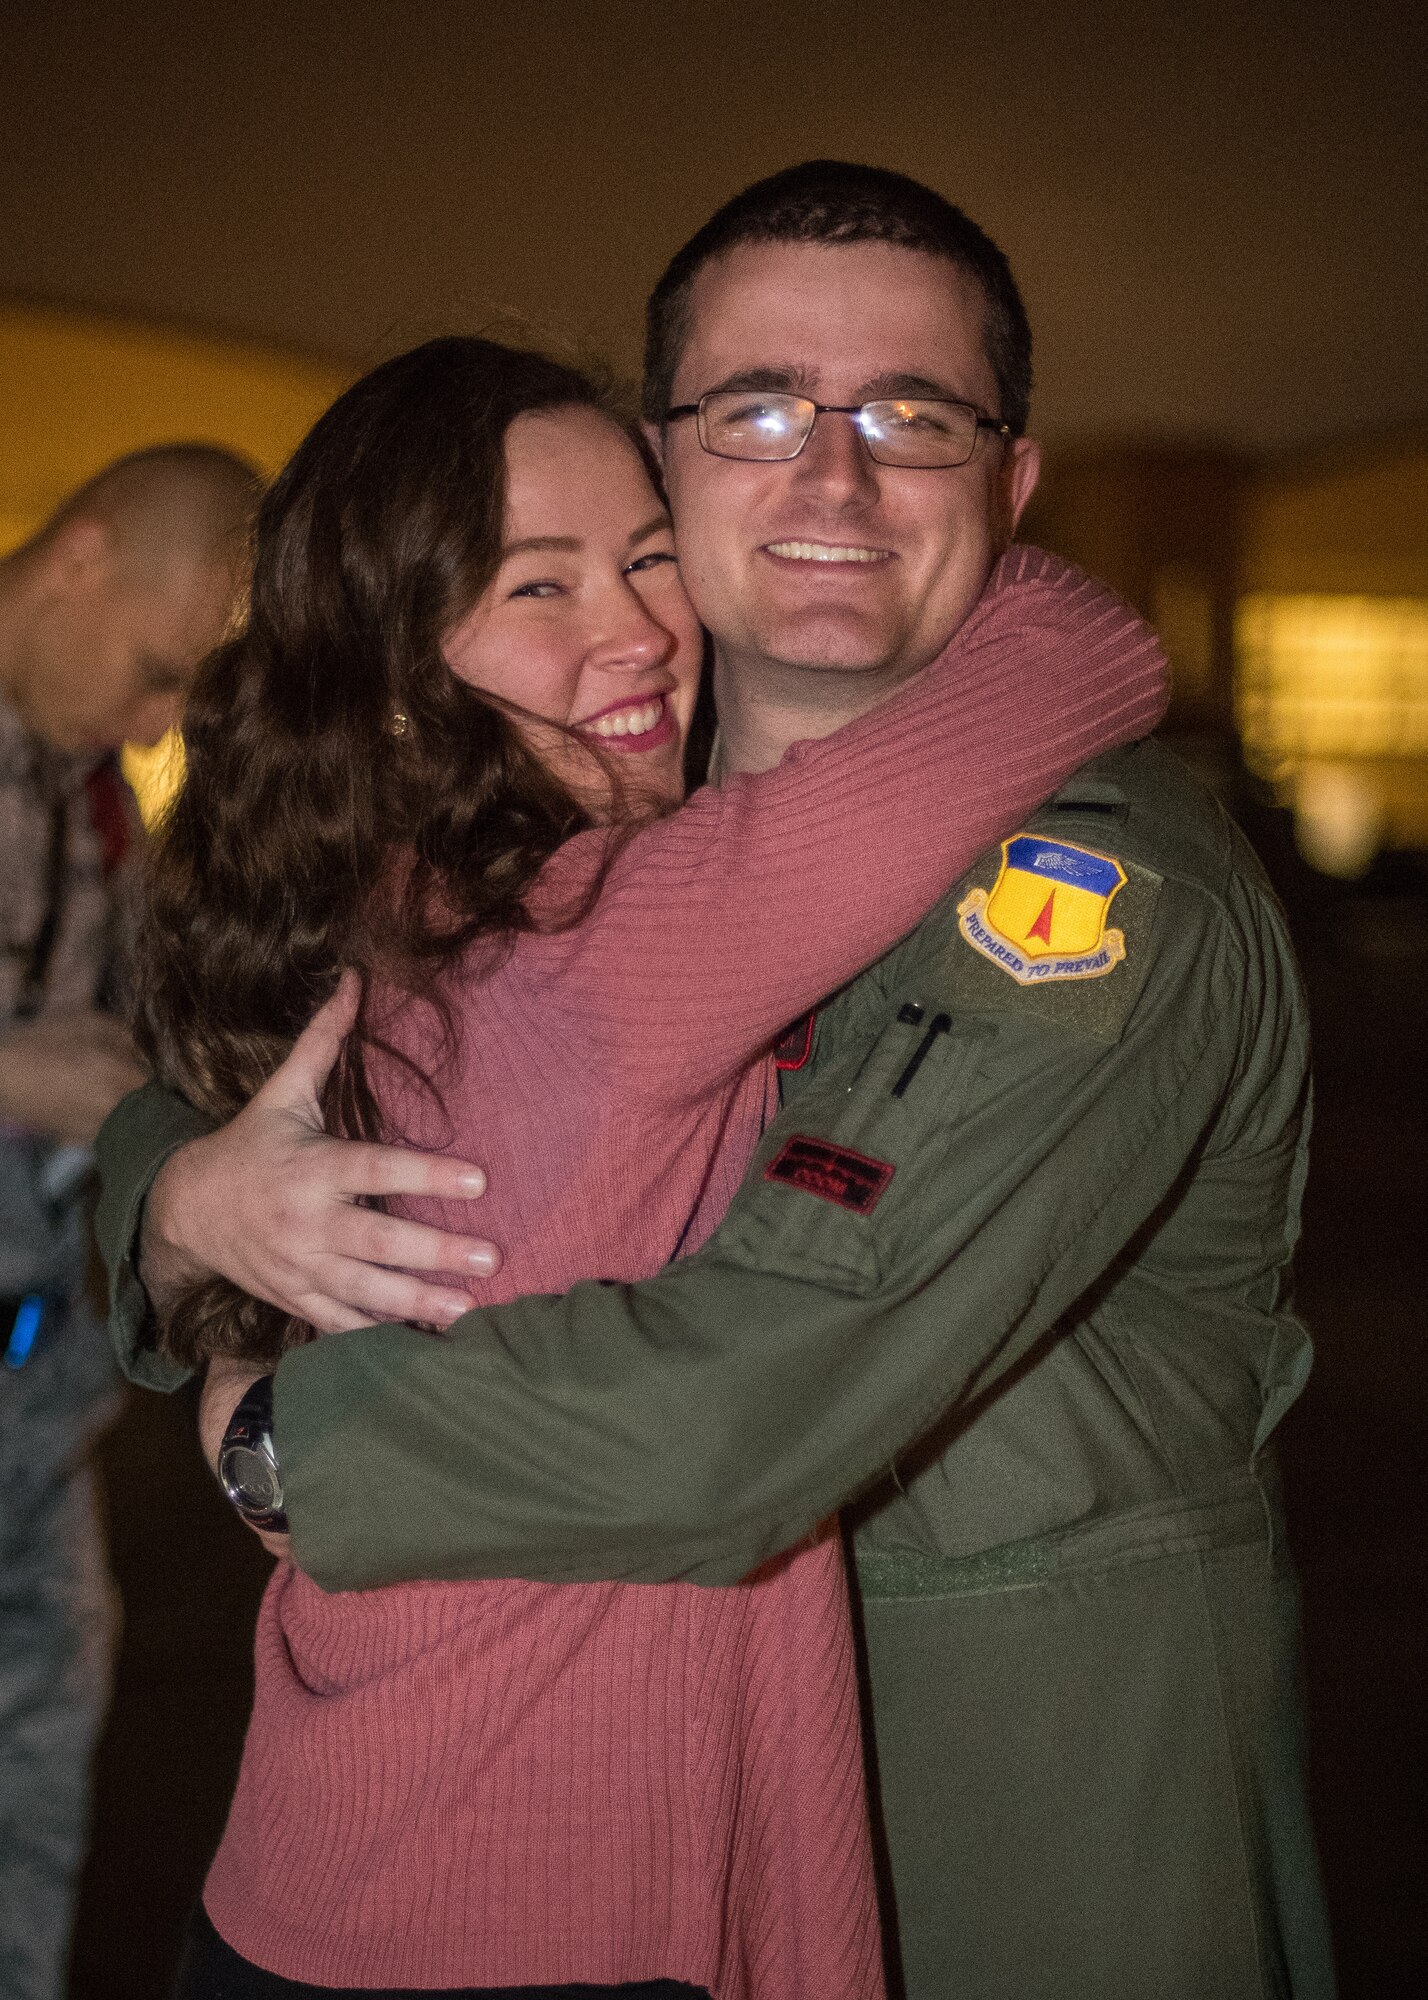 After returning from a deployment, 1st Lt. Tyler Johnson, 96th Bomb Squadron unit deployment manager, poses for a photo with his wife at Barksdale Air Force Base, La., Jan. 16, 2019. While deployed, the squadron flew deterrence missions and conducted a variety of joint missions with the U.S. Navy, U.S. Coast Guard, U.S. Marine Corps, Koku Jieitai (Japan Air Self-Defense Force), Republic of Korea Air Force and the Royal Australian Air Force. (U.S. Air Force photo by Airman 1st Class Lillian Miller)